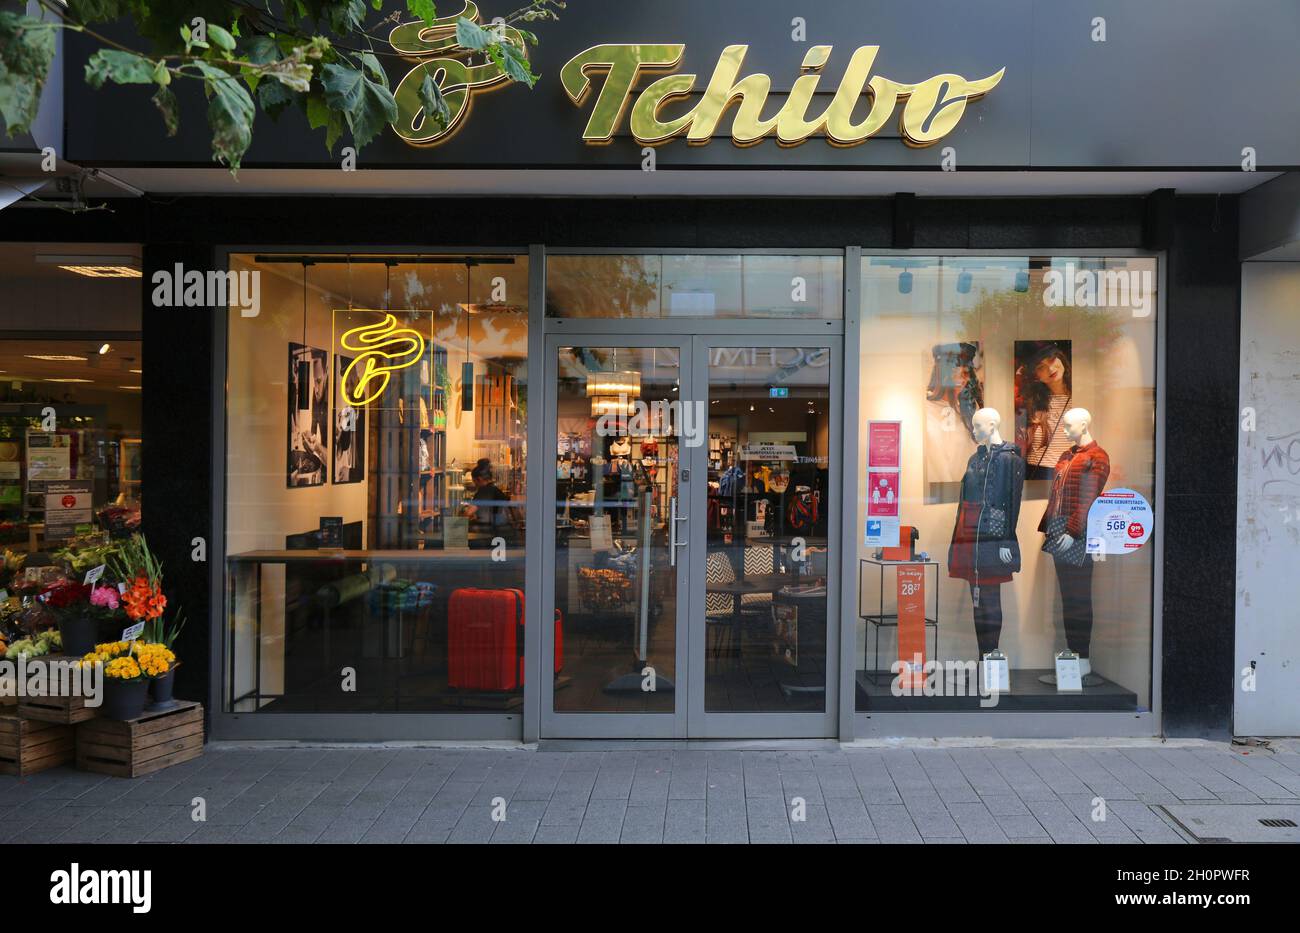 GELSENKIRCHEN, GERMANY - SEPTEMBER 17, 2020: Tchibo clothes and house wares store in Gelsenkirchen. Total retail sales in Germany amounted to 450 bill Stock Photo